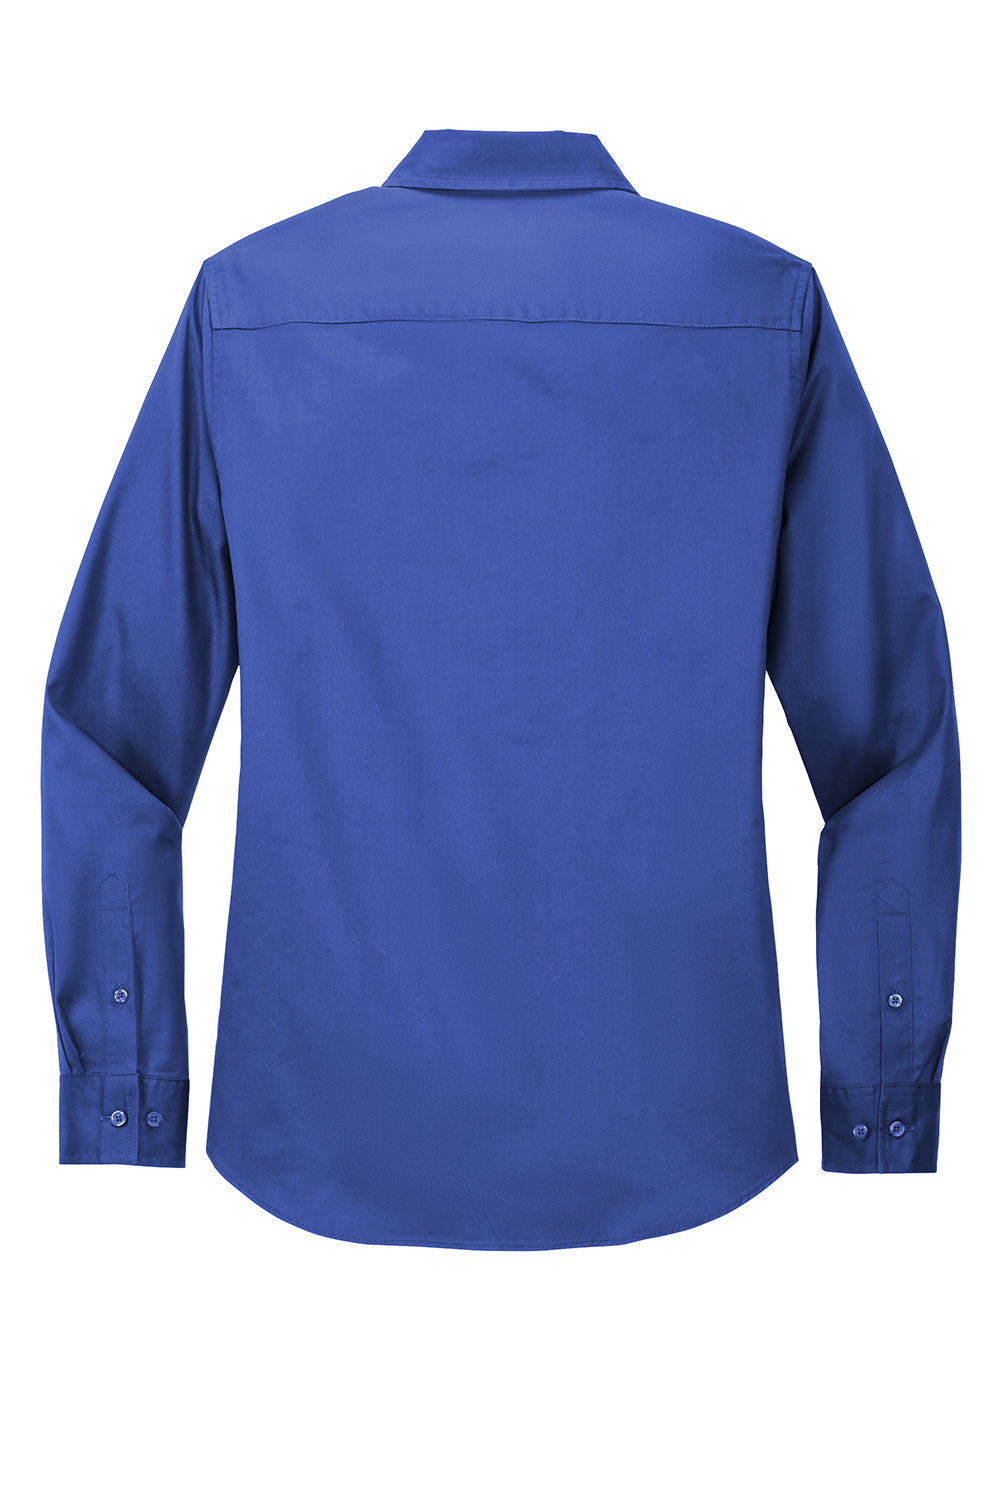 Port Authority L608 Womens Easy Care Wrinkle Resistant Long Sleeve Button Down Shirt Royal Blue Flat Back